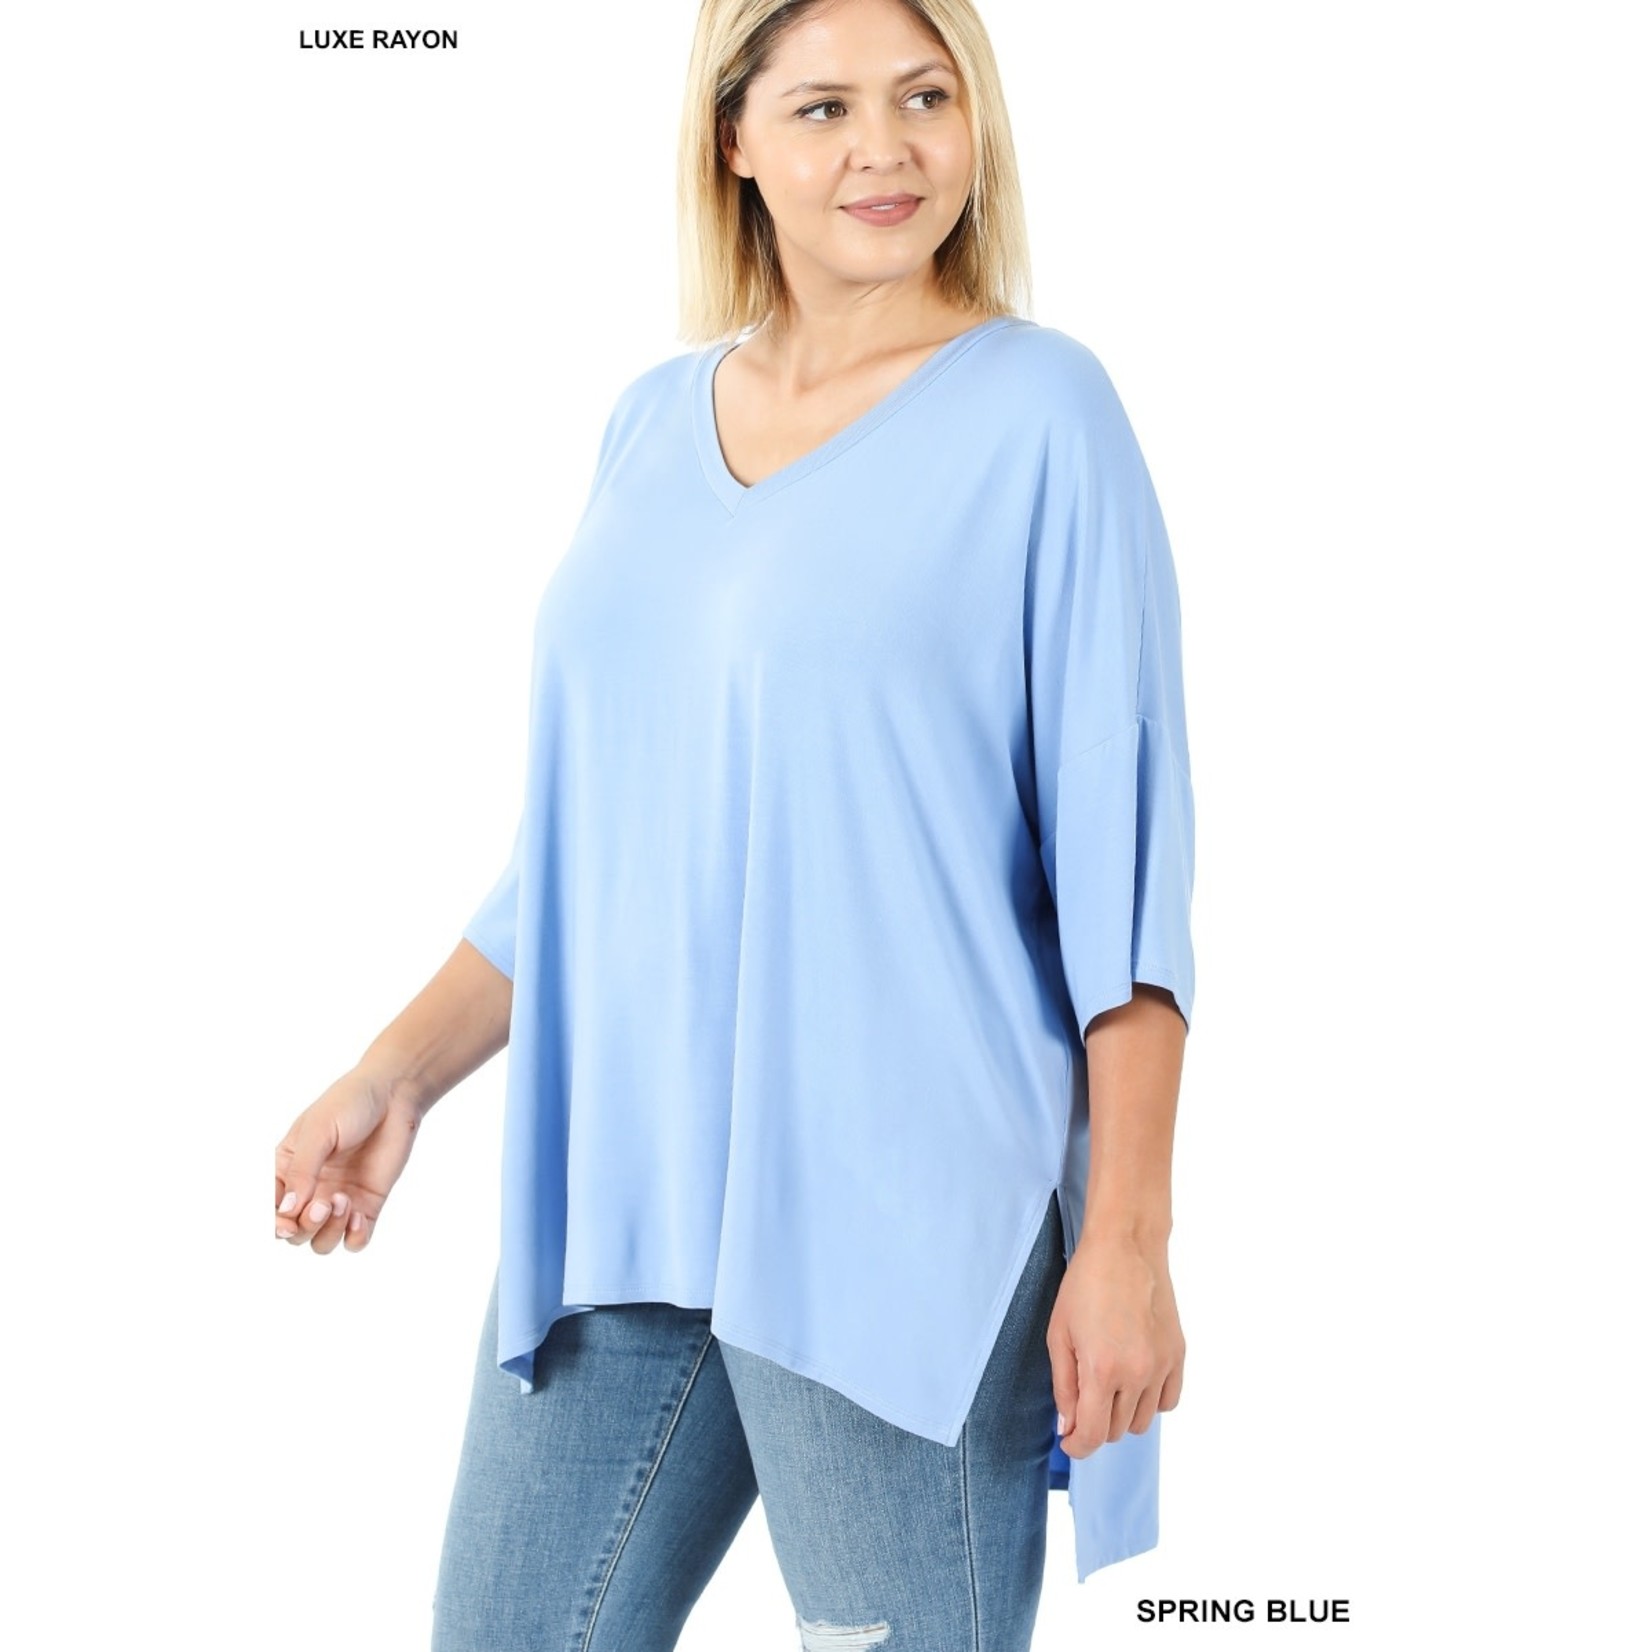 42 pops PLUS LUXE RAYON DOLMAN HALF SLEEVE V-NECK TOP